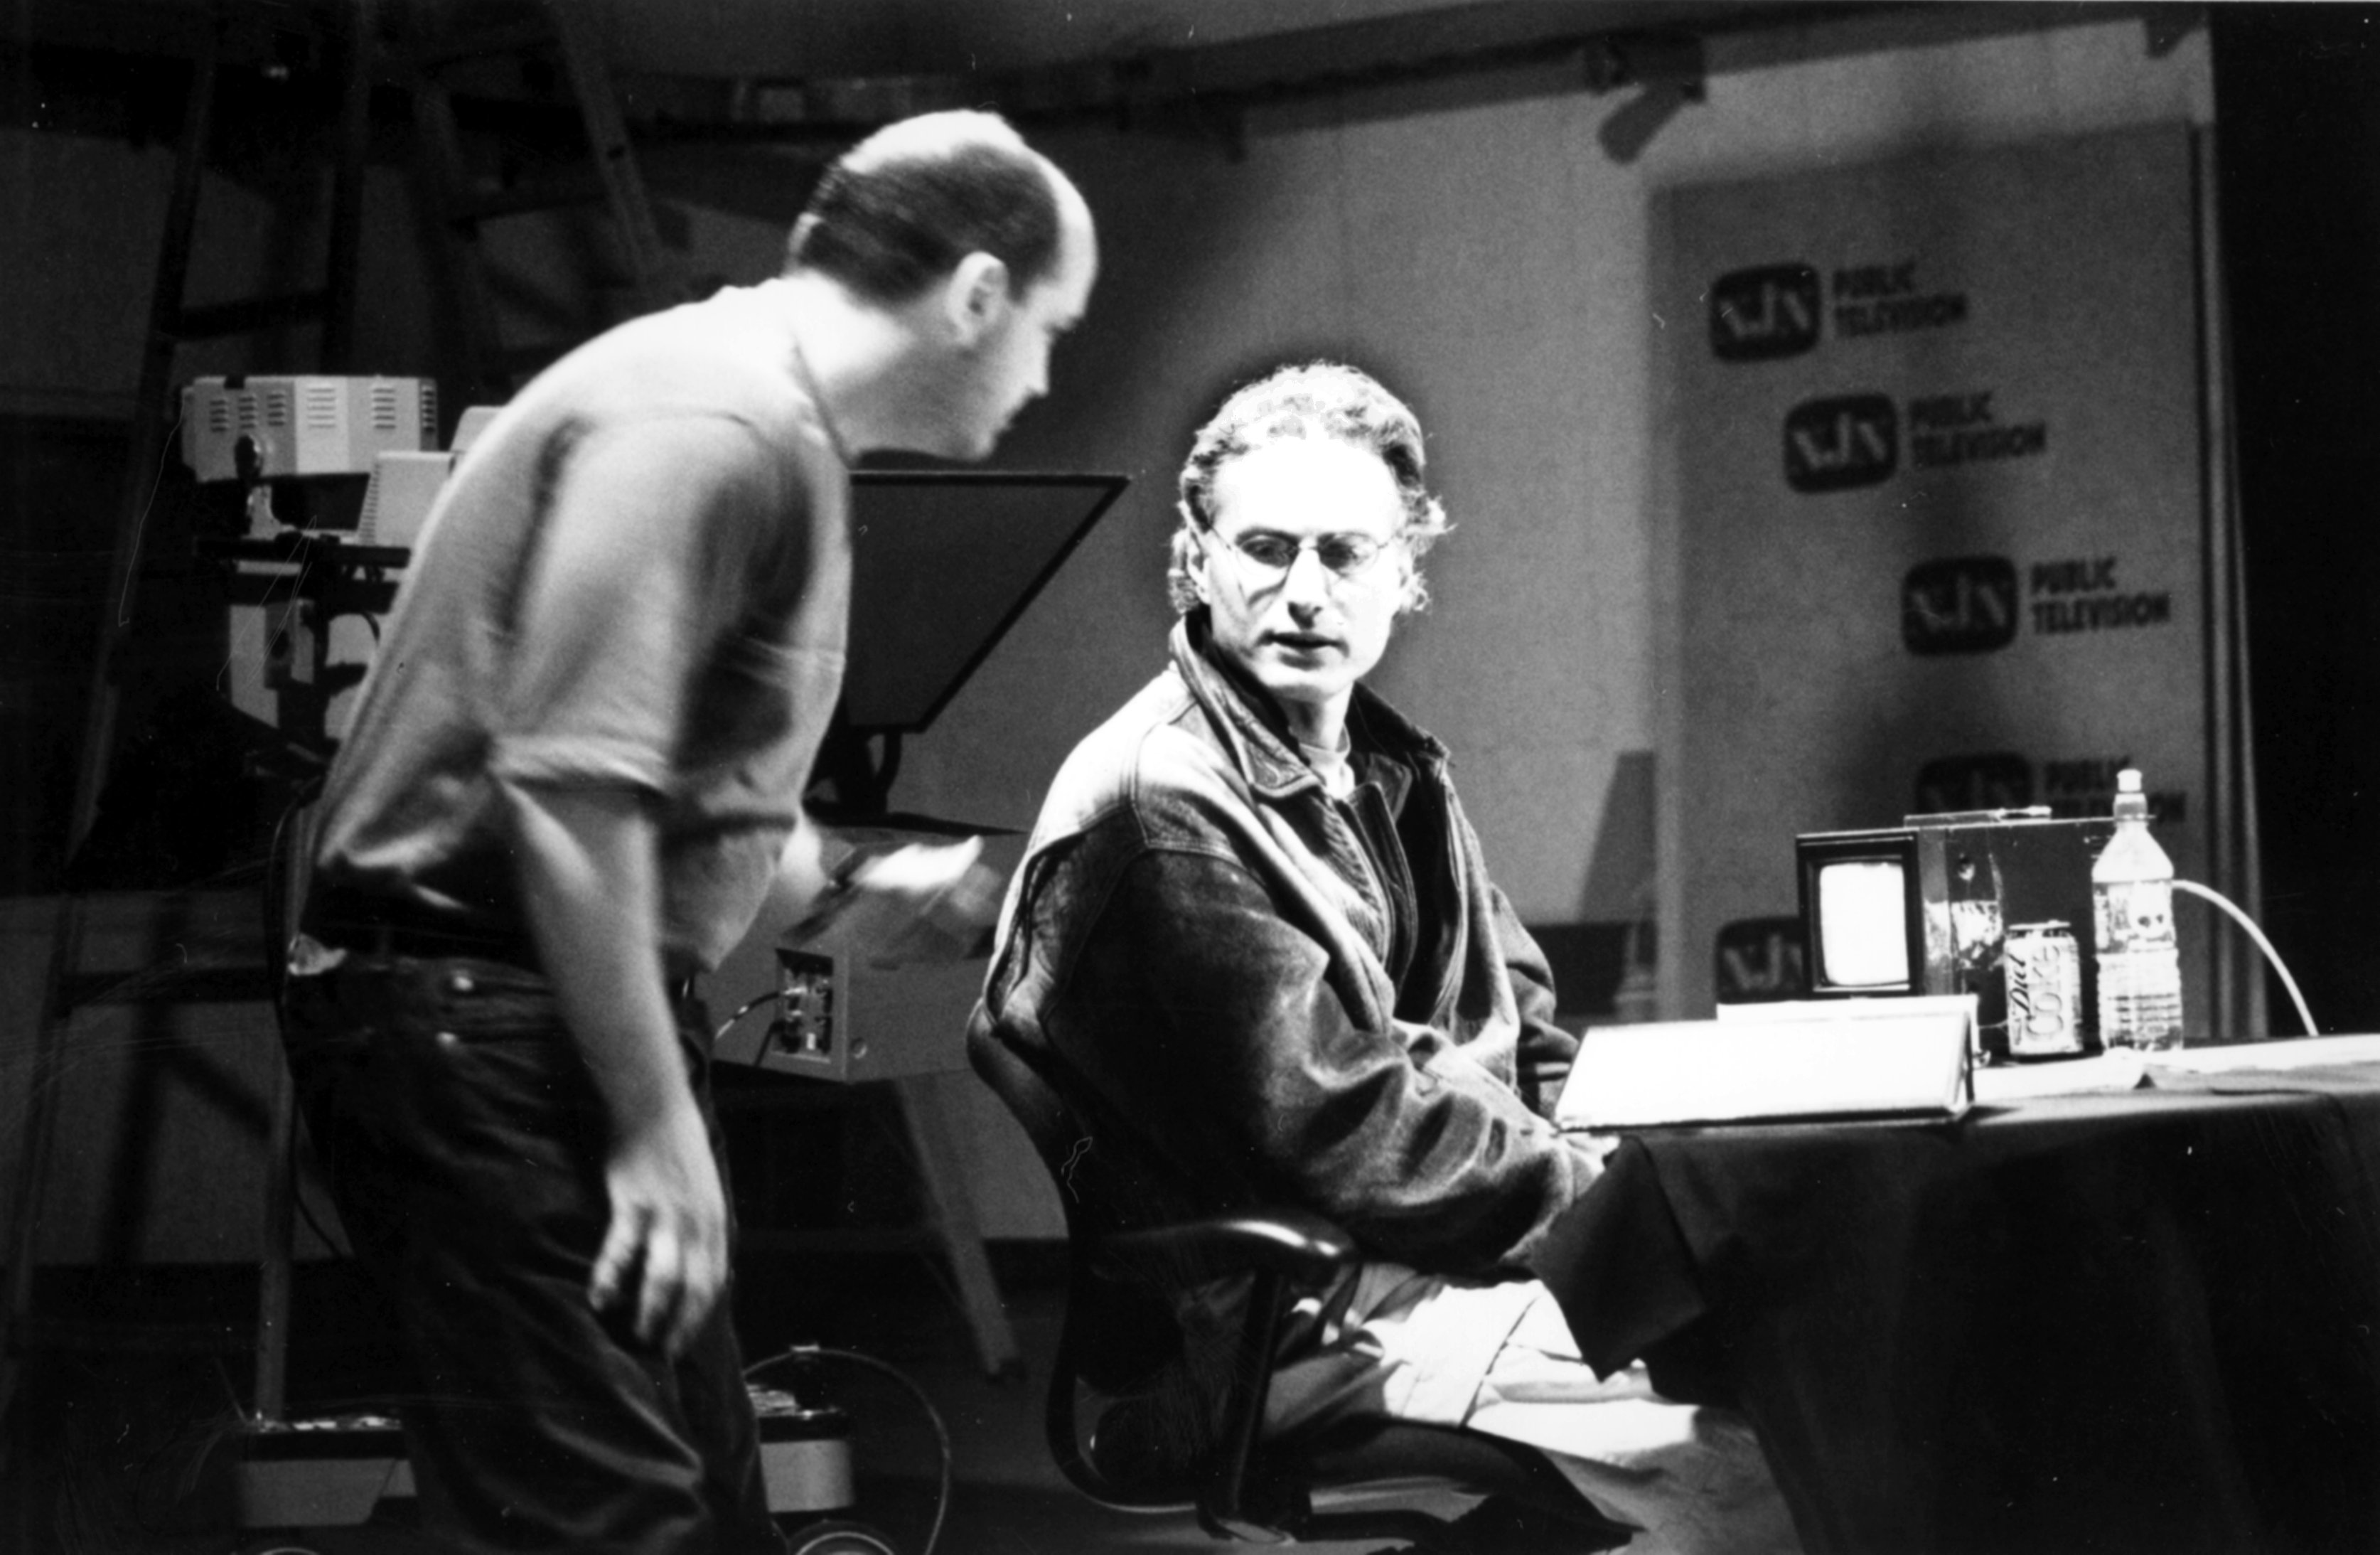 Marx confers with floor director during shoot at NJN, Newark, for BOYS TO MEN, 2000.